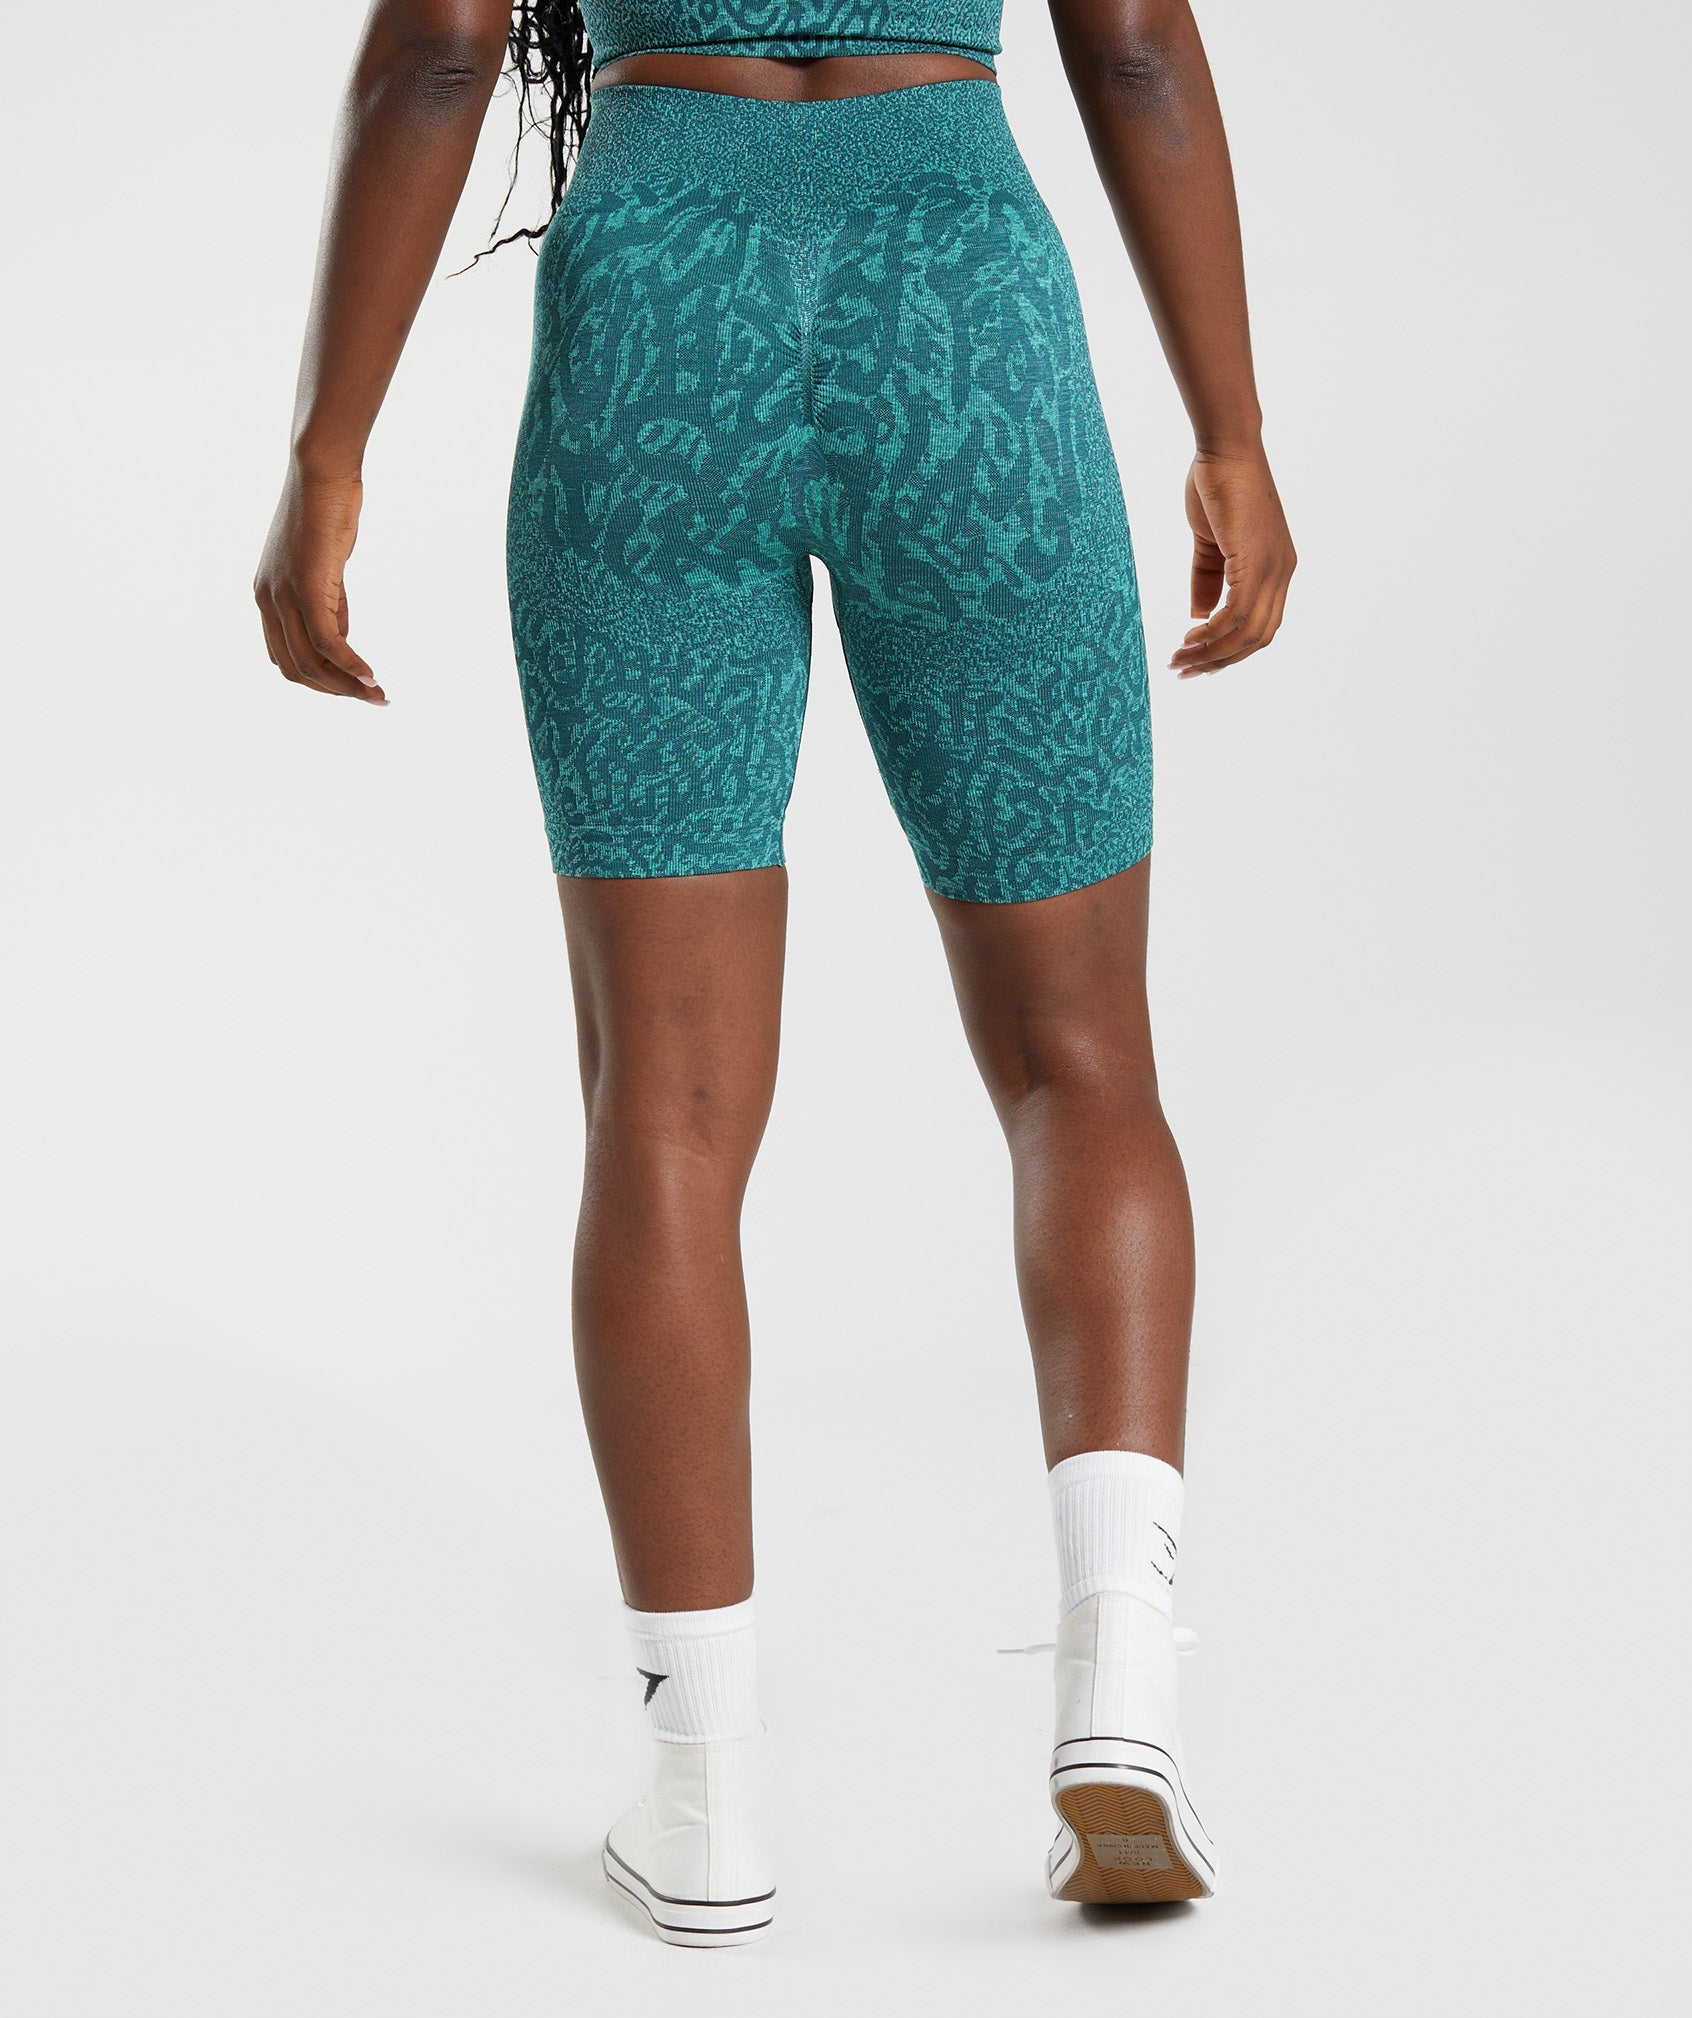 Adapt Animal Seamless Cycling Shorts in Reef | Winter Teal